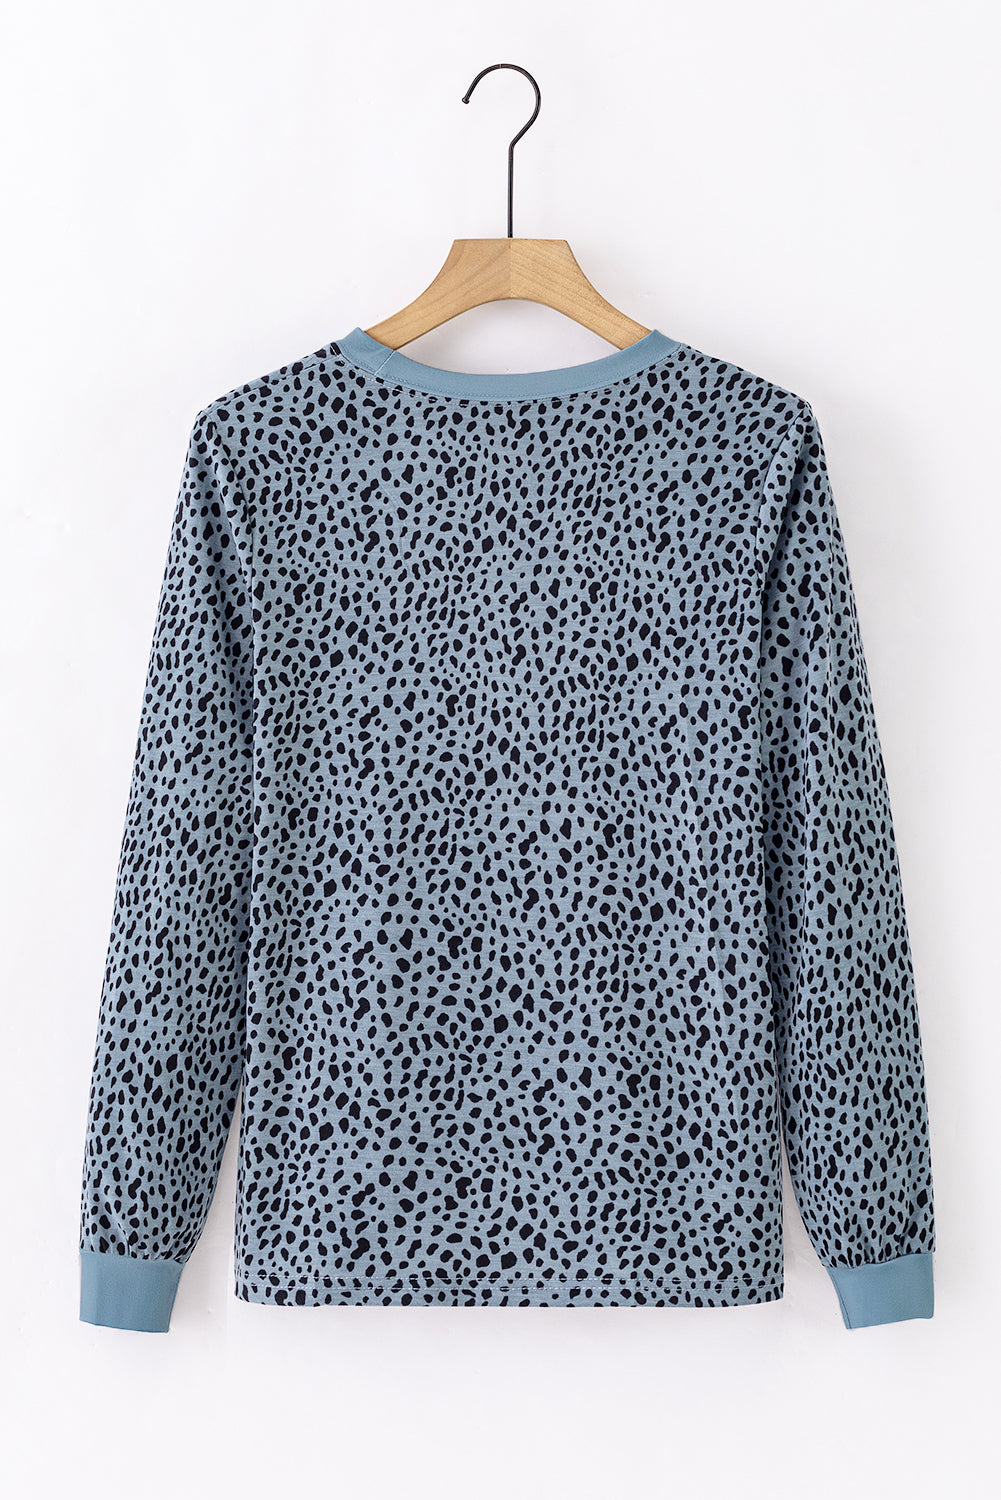 Gray Animal Spotted Print Round Neck Long Sleeve Top